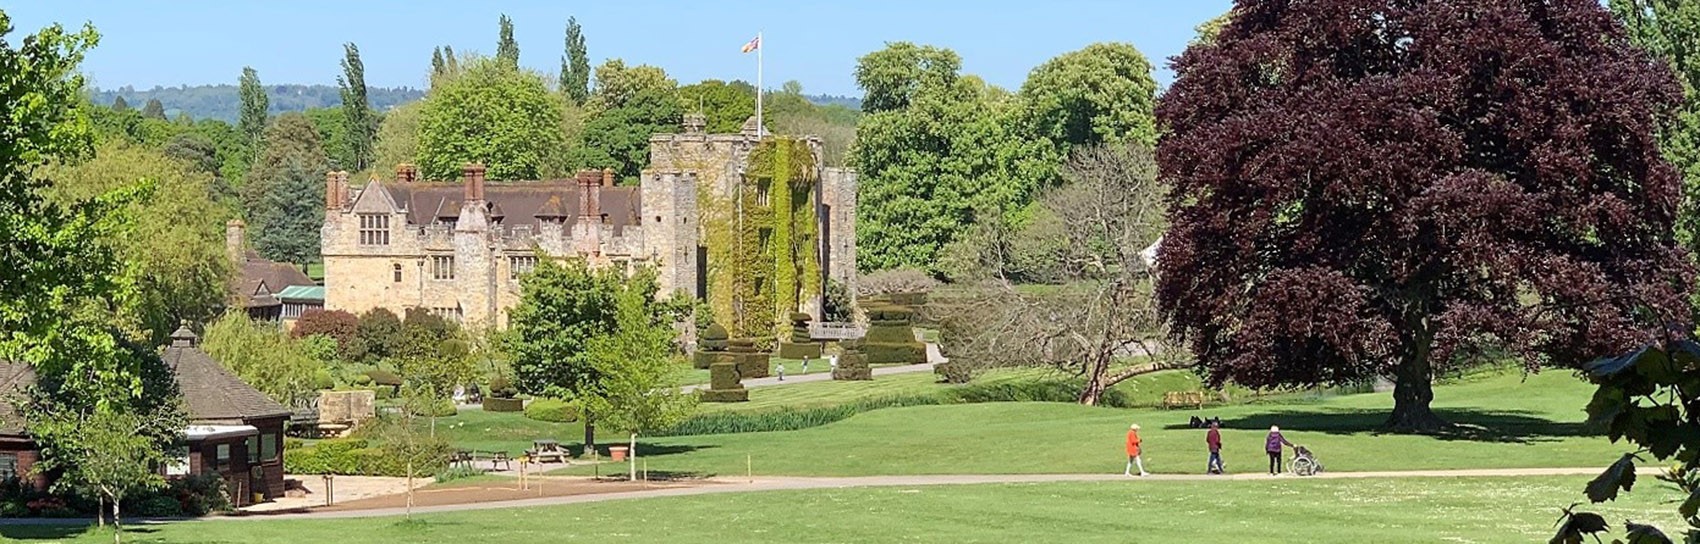 Hever Castle. Photograph by DAWN BLEE